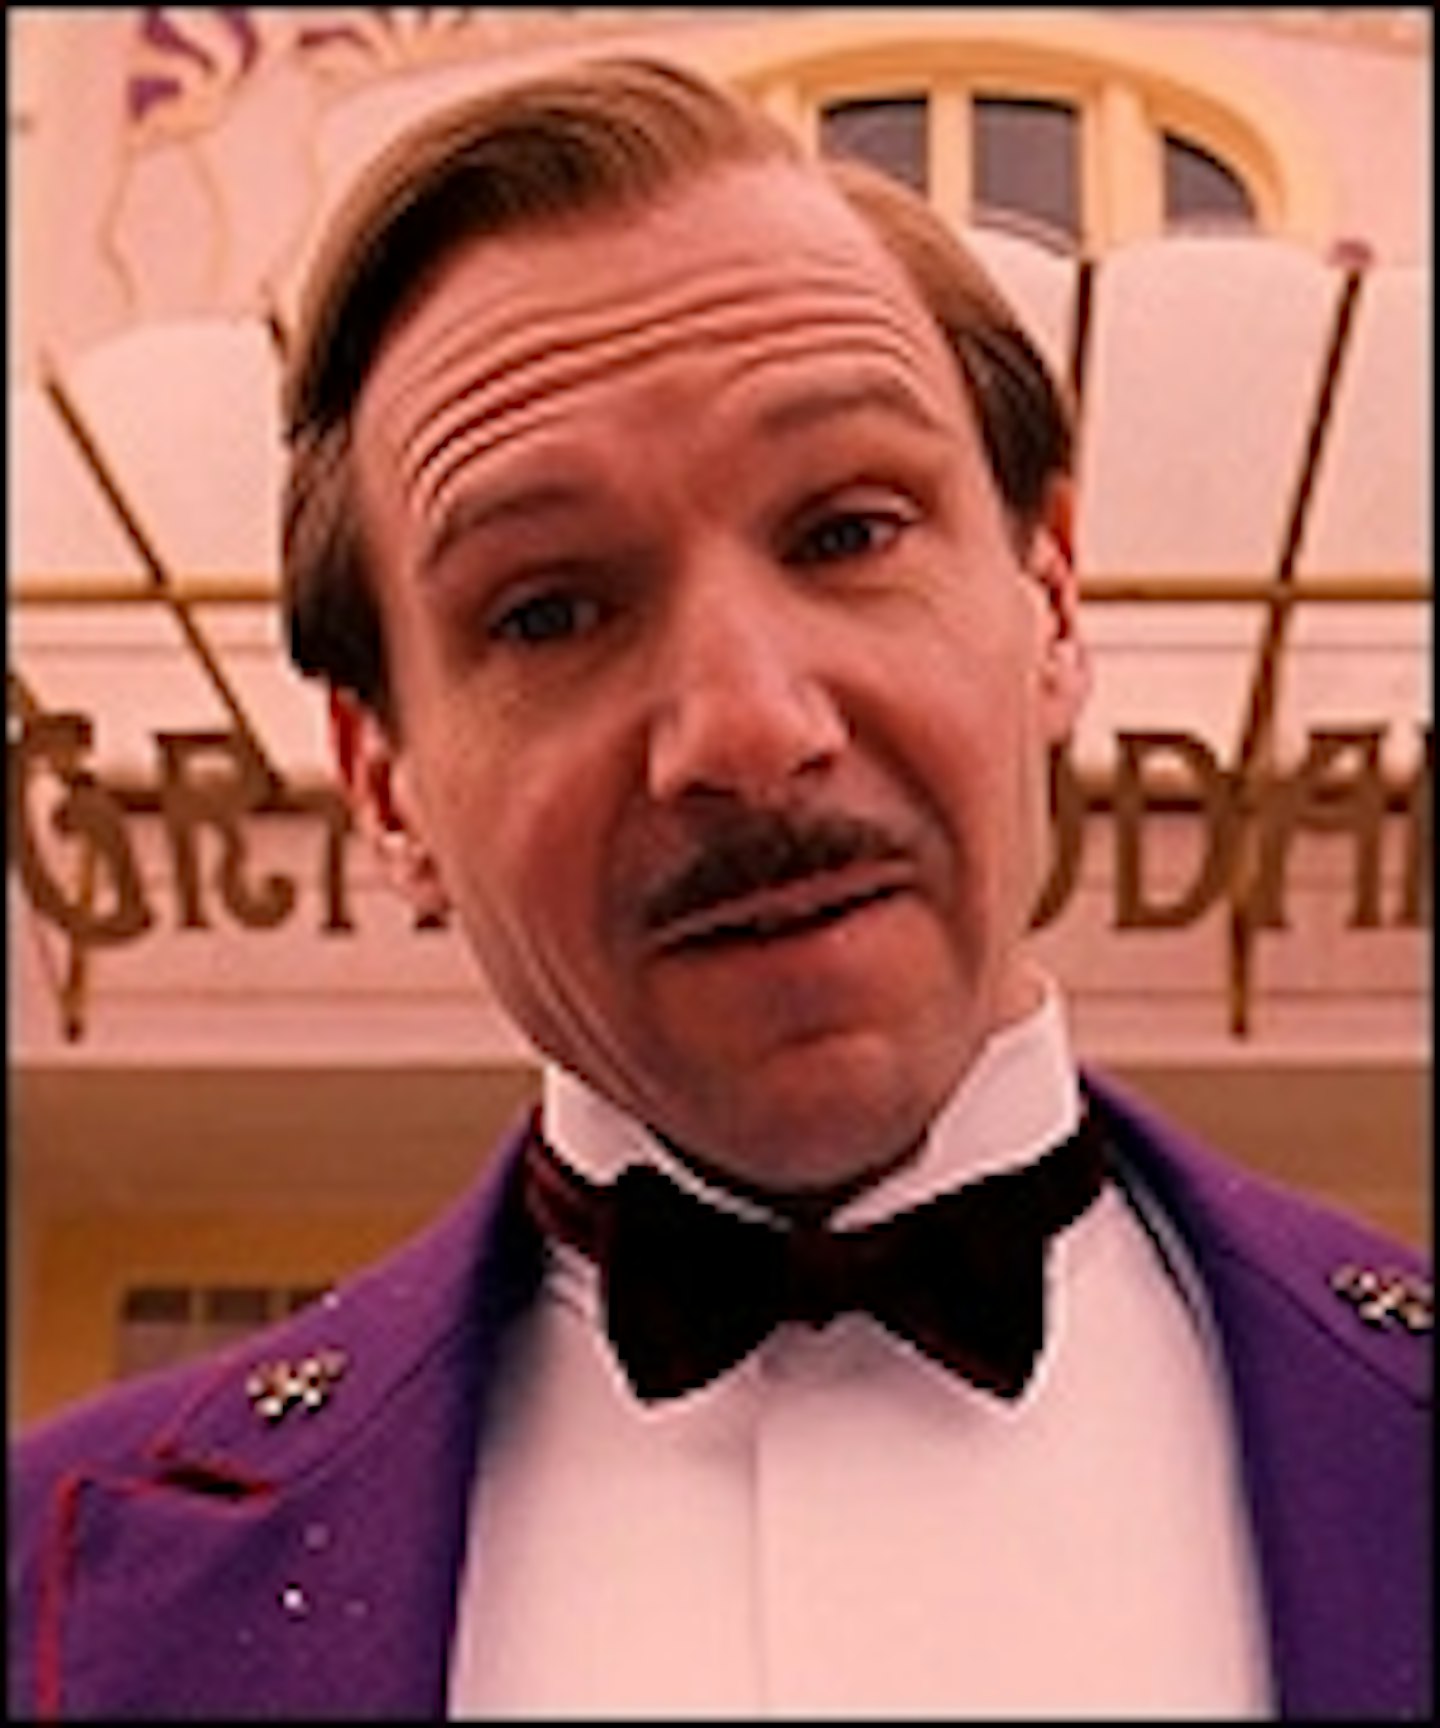 The Grand Budapest Hotel Trailer Is Here